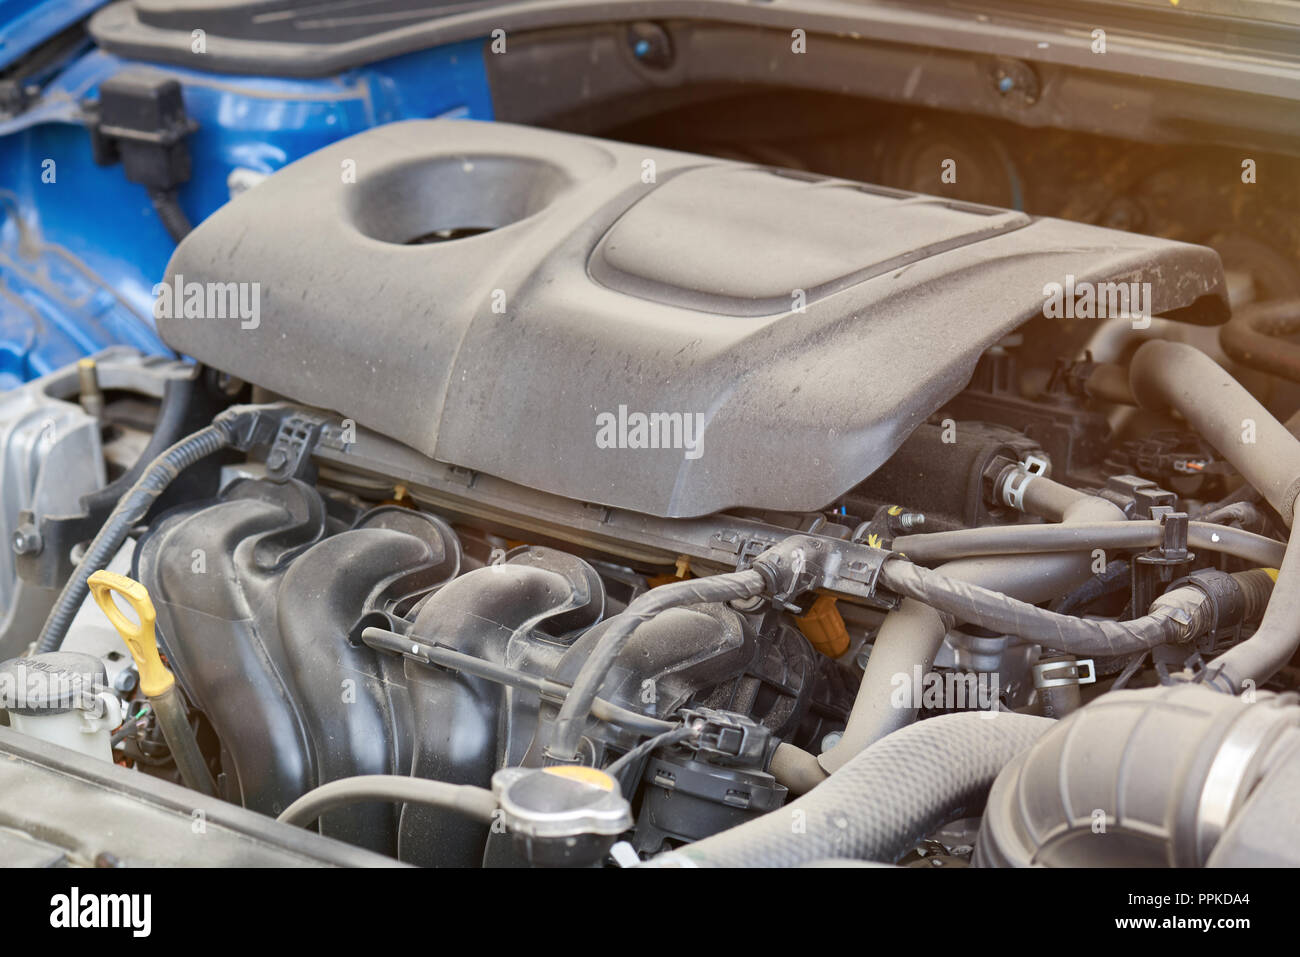 Modern dirty car engine close up view Stock Photo